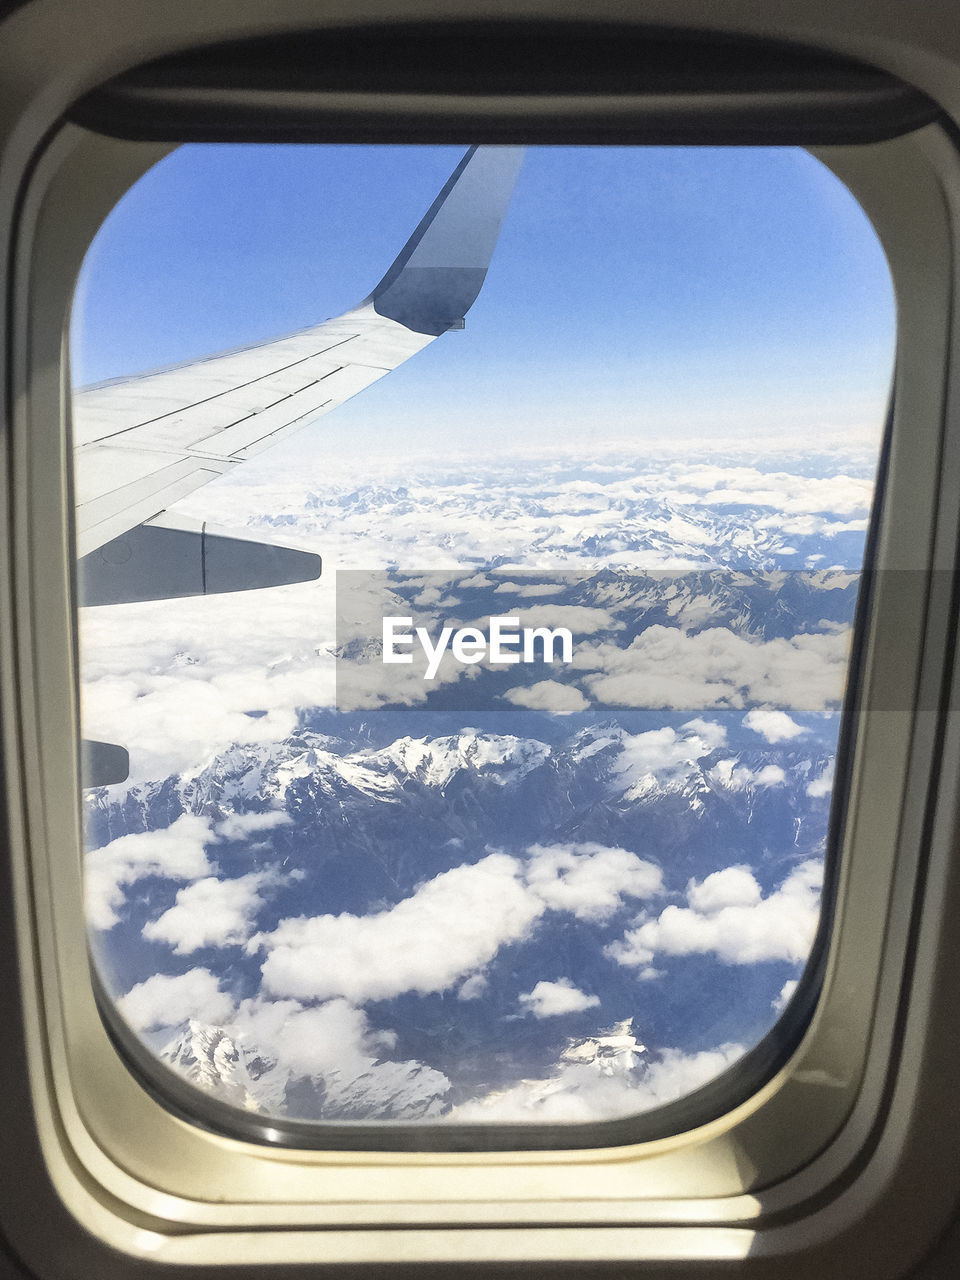 CROPPED IMAGE OF AIRPLANE WING OVER MOUNTAIN LANDSCAPE